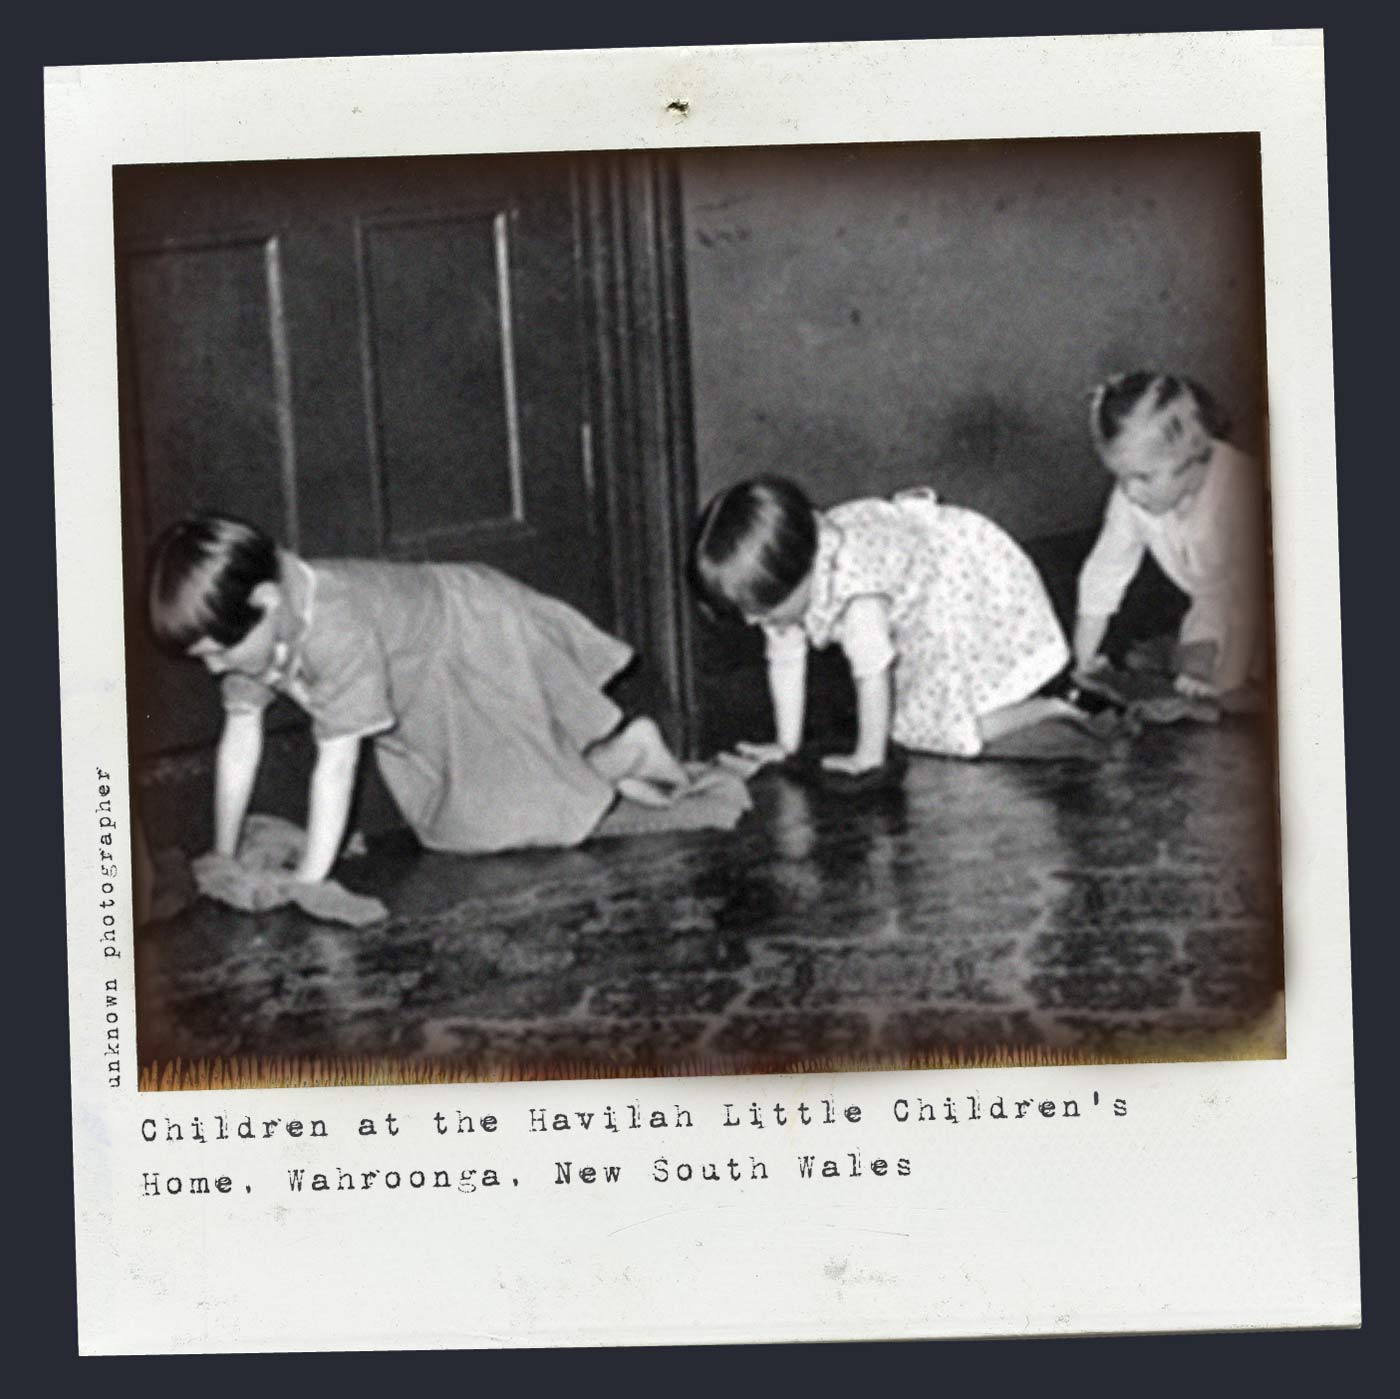 Polaroid photograph showing three girls, on hands and knees, polishing a floor. Typewritten text below reads 'Children at the Havilah Little Children's Home, Wahroonga, New South Wales'. 'Unknown photographer' is typed along the left side. - click to view larger image